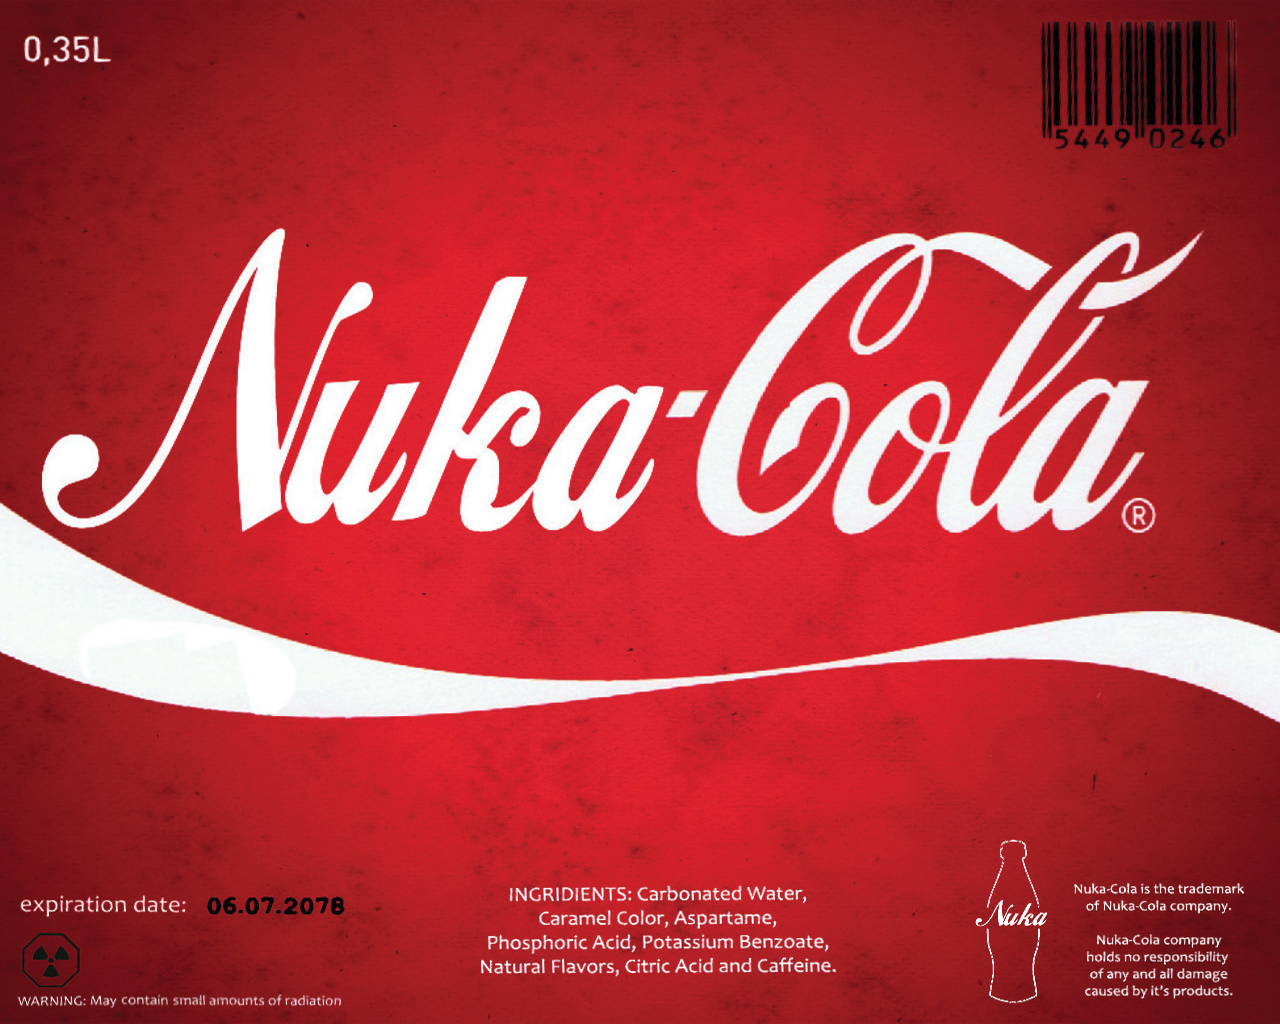 General 1280x1024 video games numbers barcode Fallout PC gaming Nuka-Cola